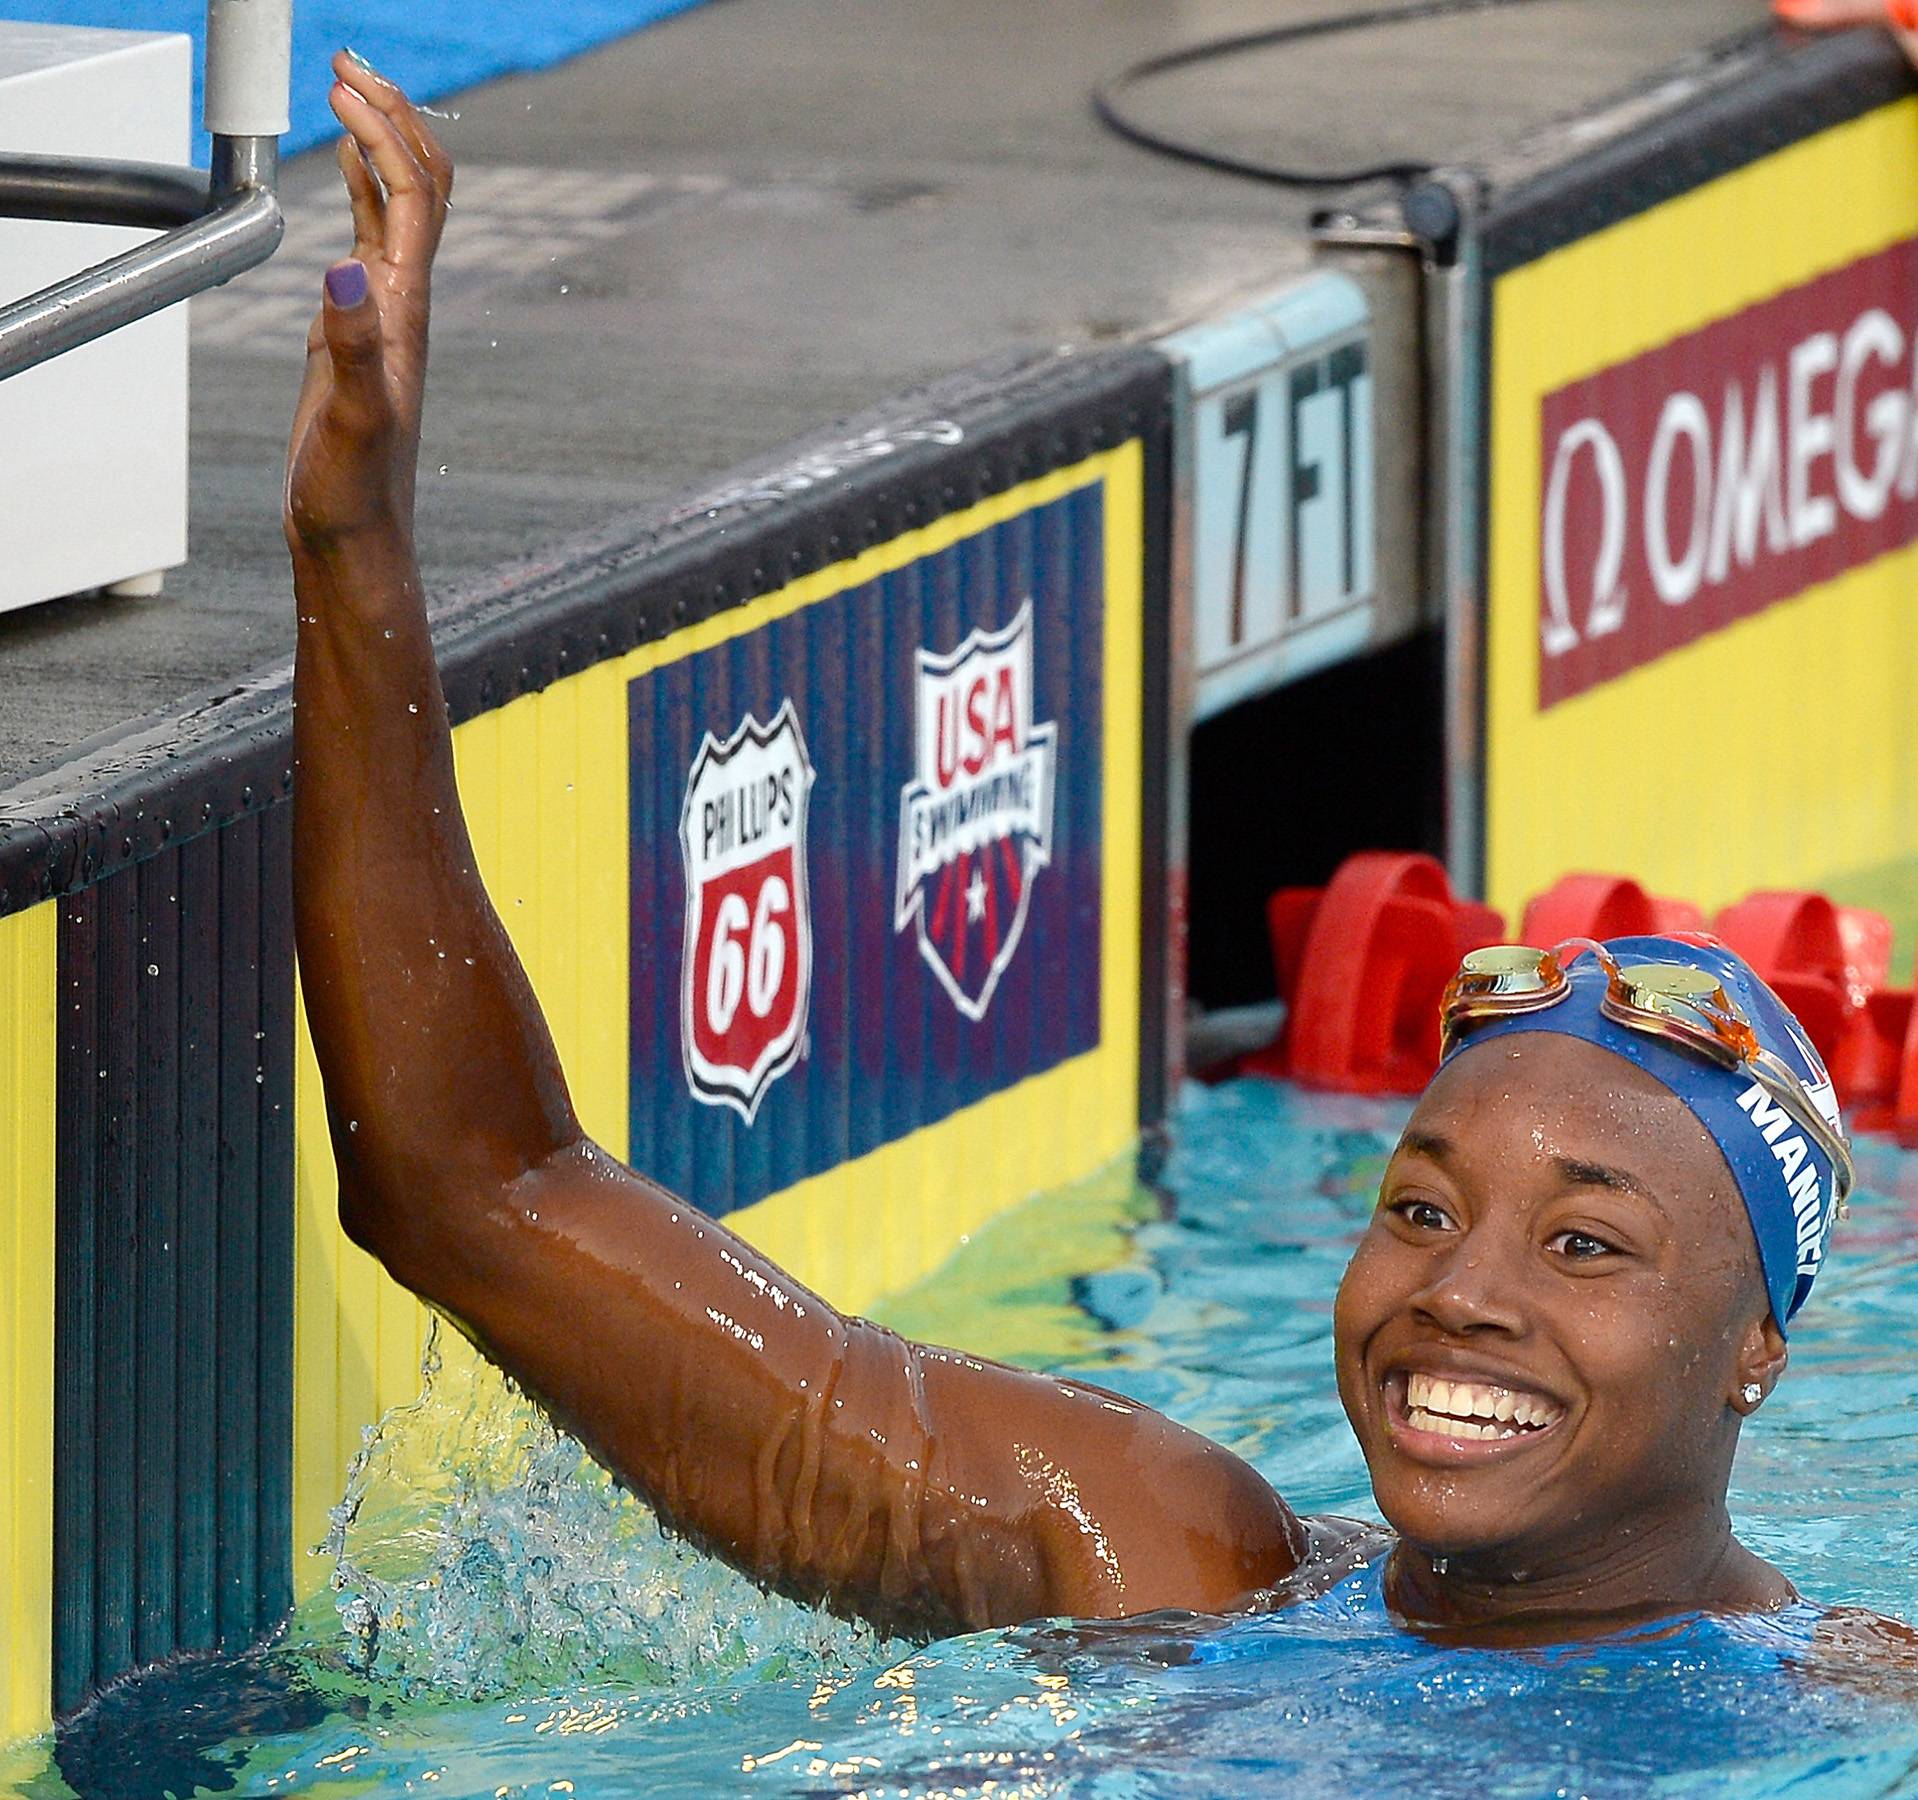 Three Black Women Make History at NCAA Swimming Competition - Simone Manuel (pictured above), Lia Neal and Natalie Hinds made history when they&nbsp;placed 1st, 2nd and 3rd, respectively, in the women's NCAA swimming championships. Manuel and Neal attend Stanford University, and Hinds is a student at the University of Florida.&nbsp;(Photo: Harry How/Getty Images)